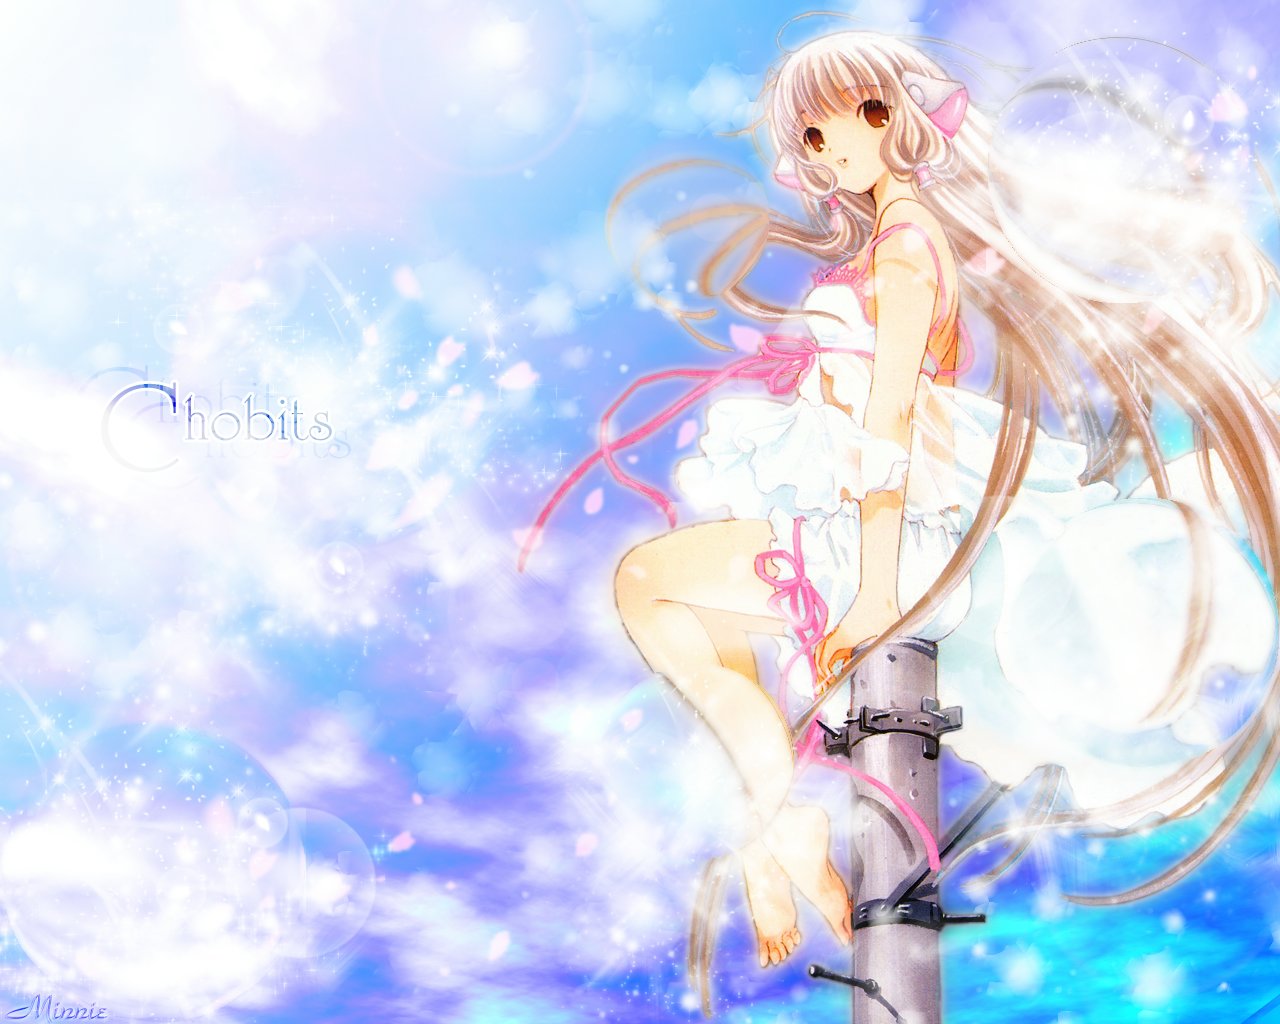 Free download wallpaper Anime, Chobits on your PC desktop